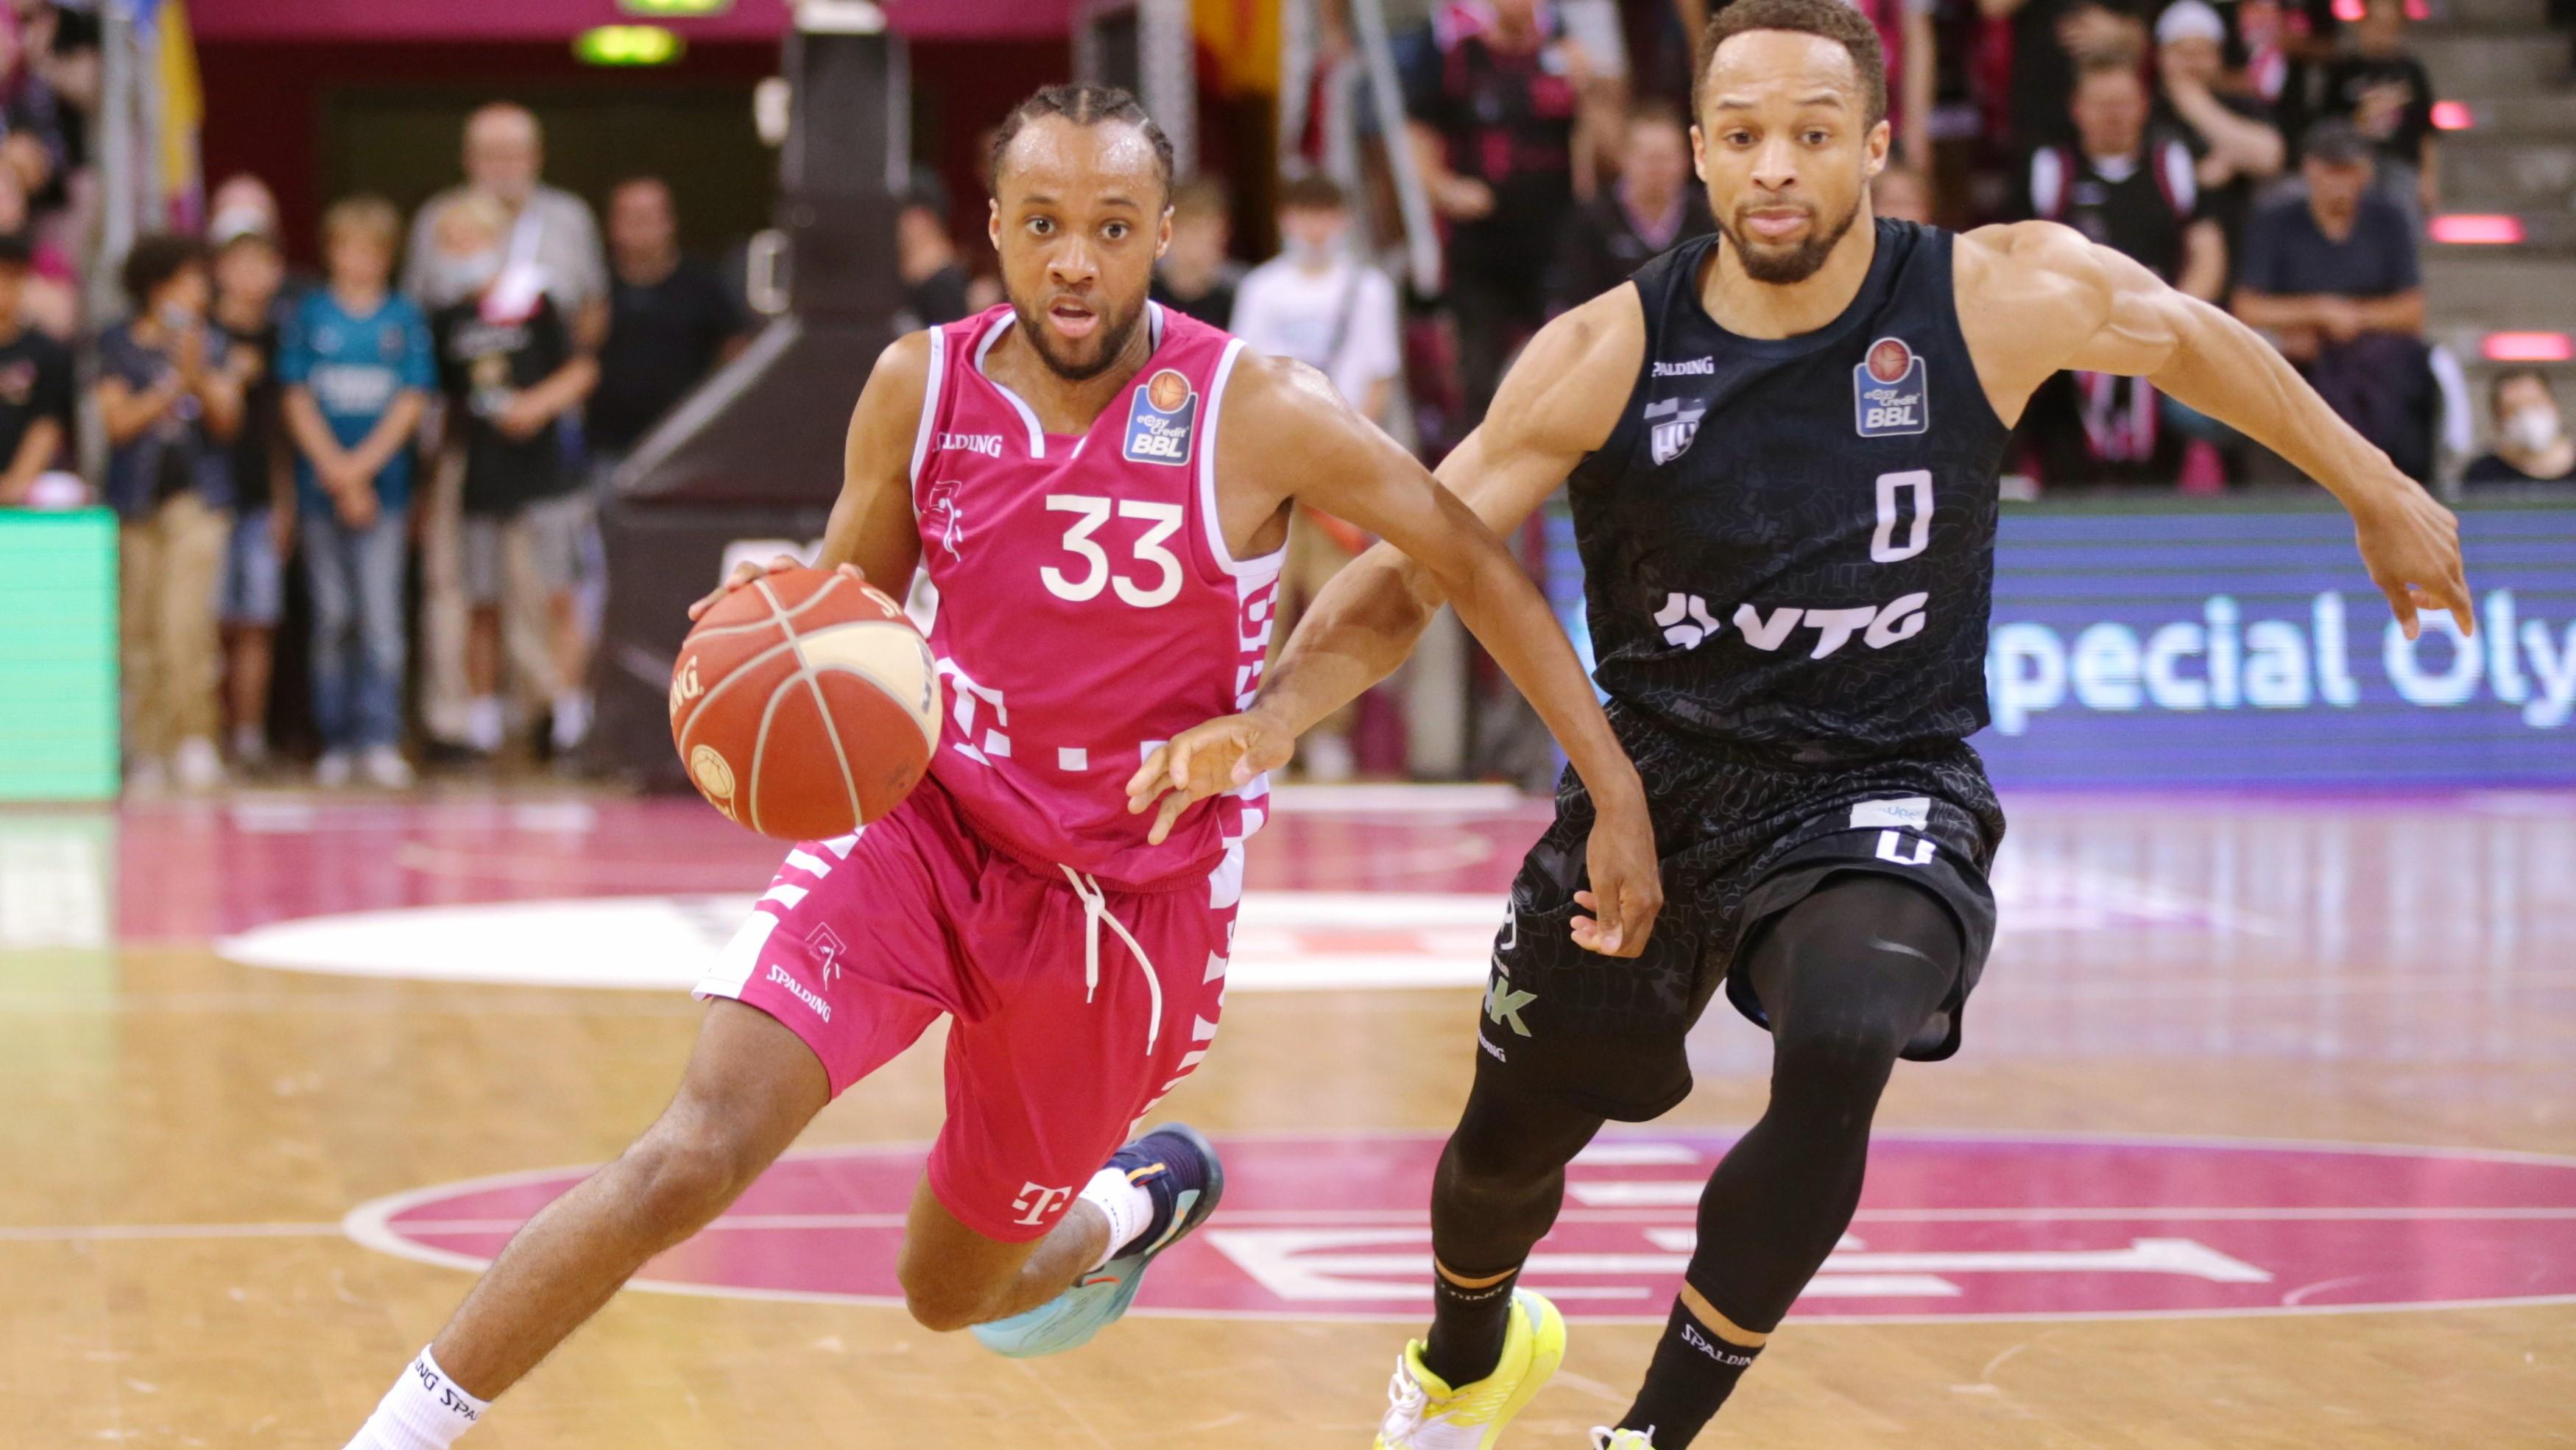 All four higher seeds have raced away to 2-0 leads in their playoffs, including Telekom Baskets Bonn, who got MVP-worthy performances by the league’s Most Valuable Player Parker Jackson-Cartwright against Hamburg Towers. There was also major drama in Ludwigsburg where MHP RIESEN Ludwigsburg and ratiopharm ulm twice went to overtime though Ludwigsburg won both times. Off the court, Pedro Calles said he will be leaving Hamburg after the season while Ingo Freyer will not be back at EWE Baskets Oldenburg and Roel Moors announced he will be staying at BG Göttingen.